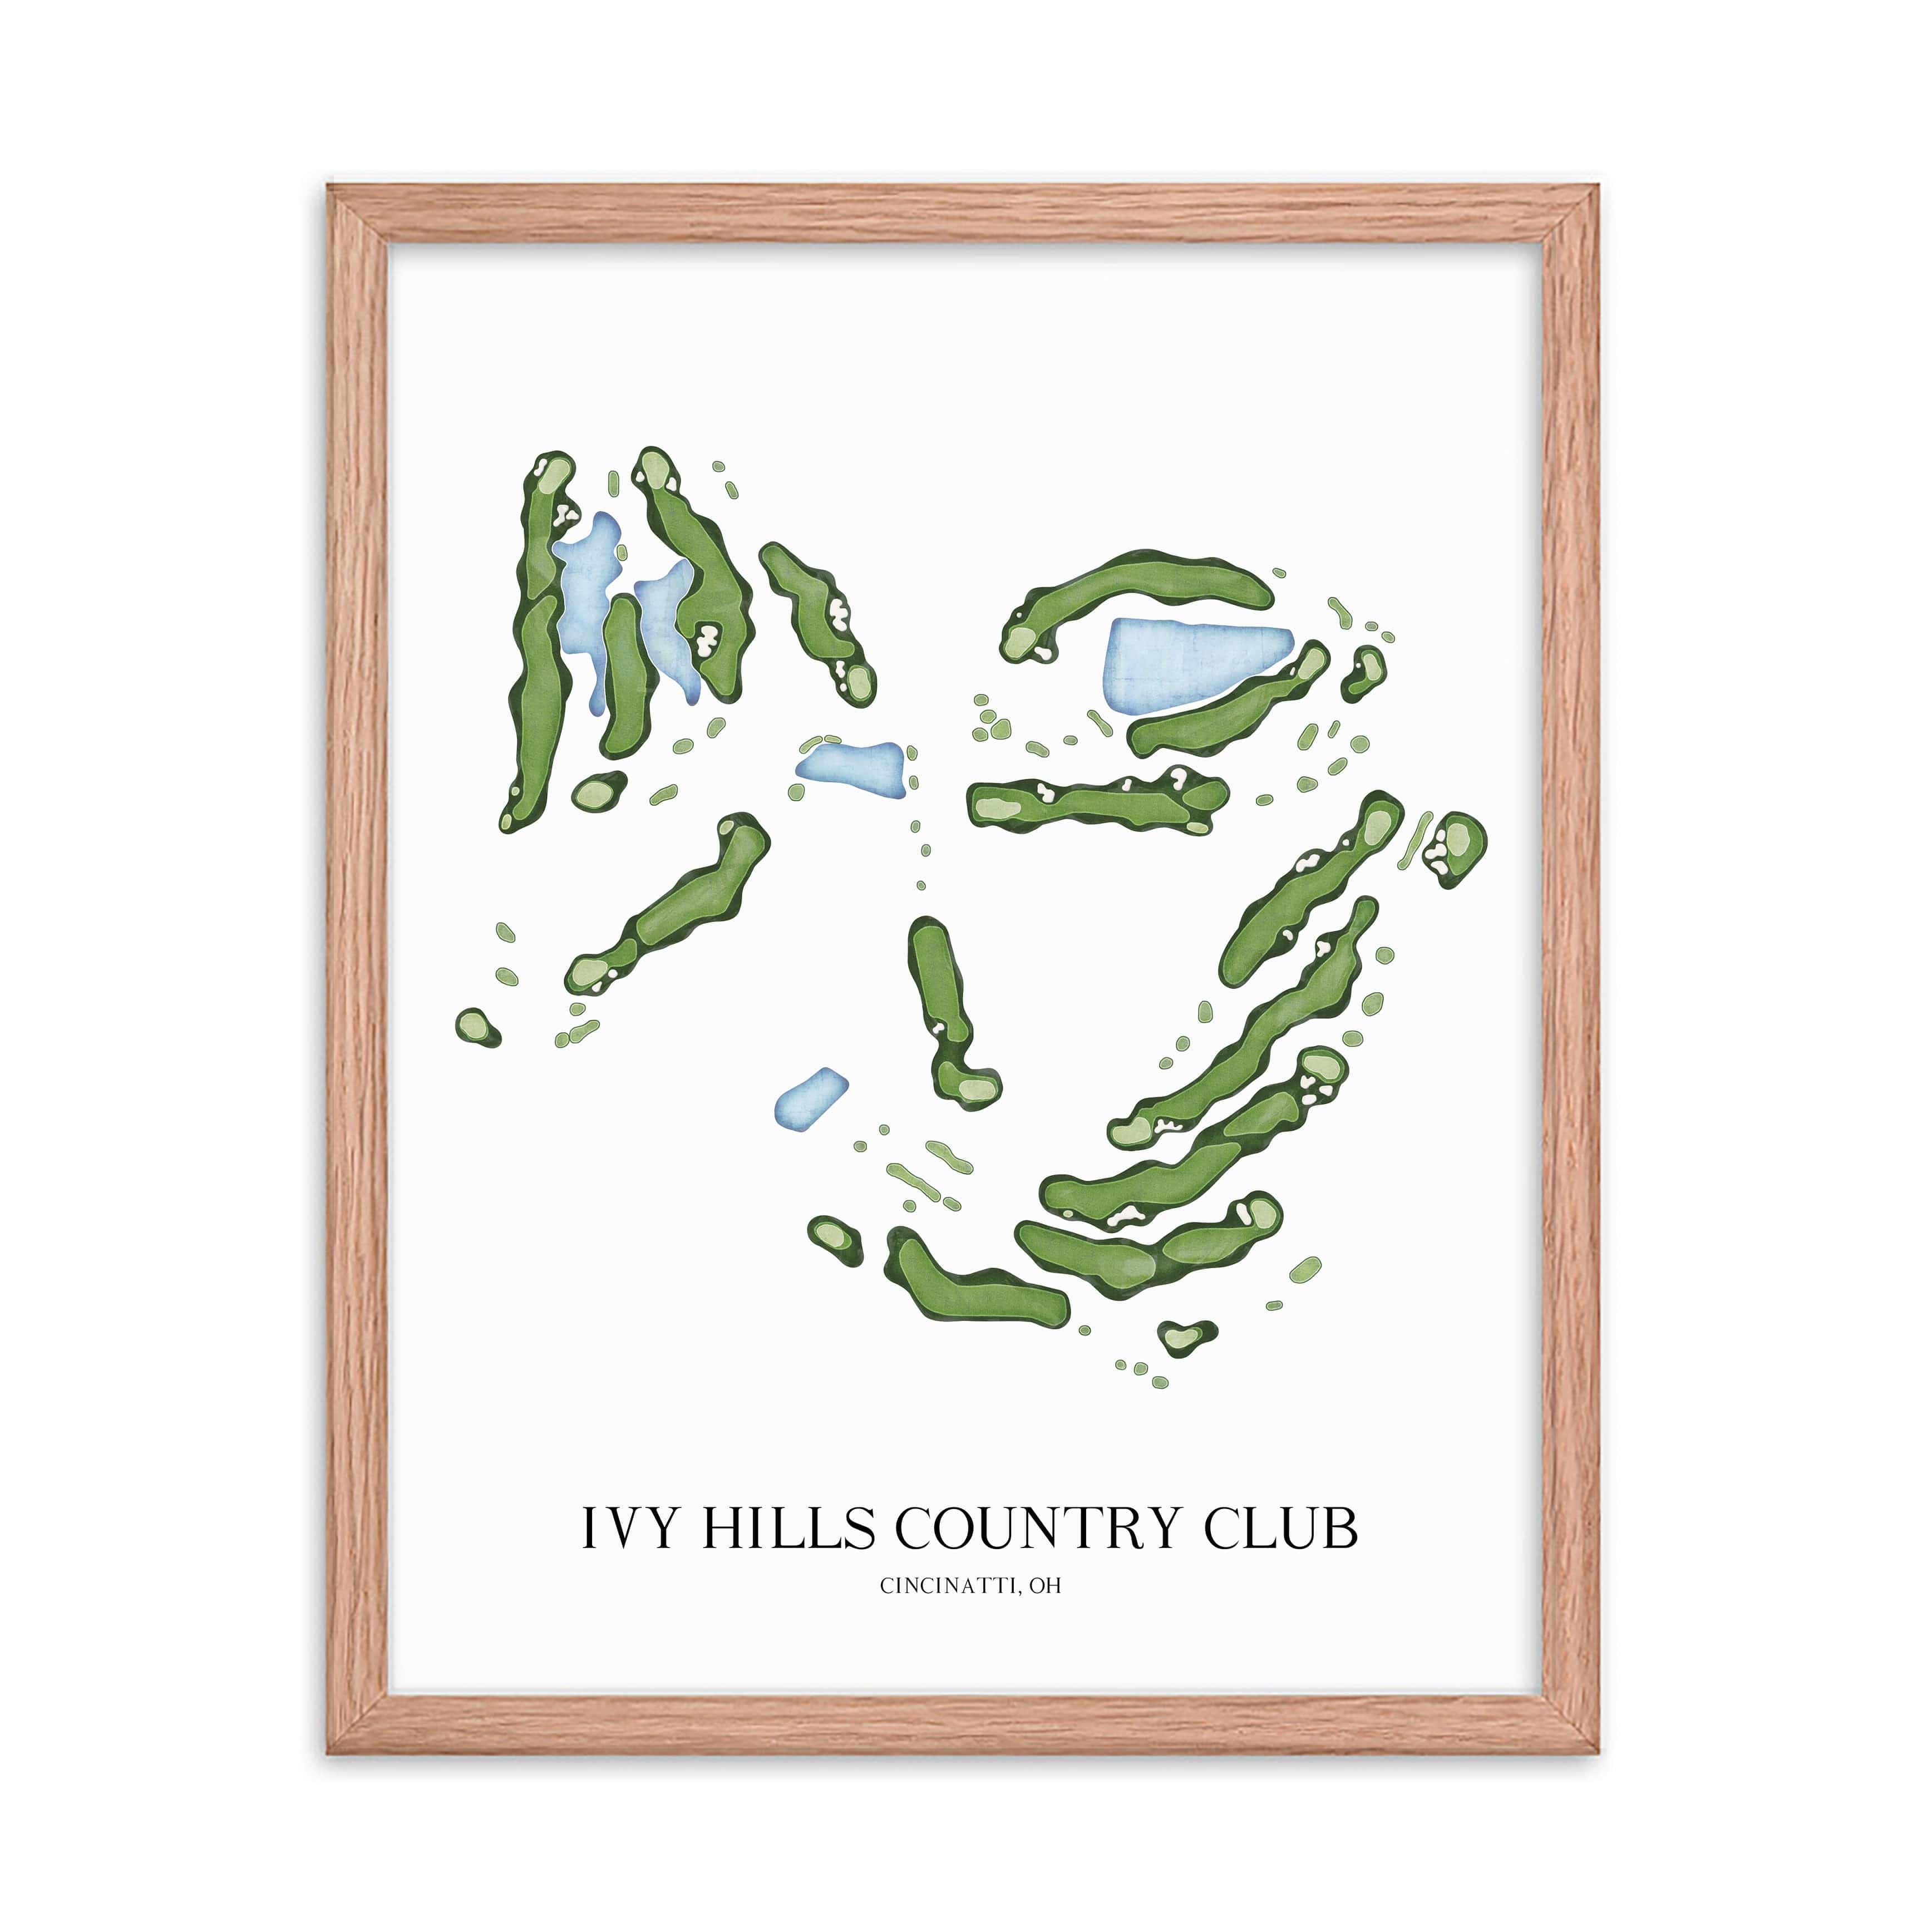 The 19th Hole Golf Shop - Golf Course Prints -  Ivy Hills Country Club Golf Course Map